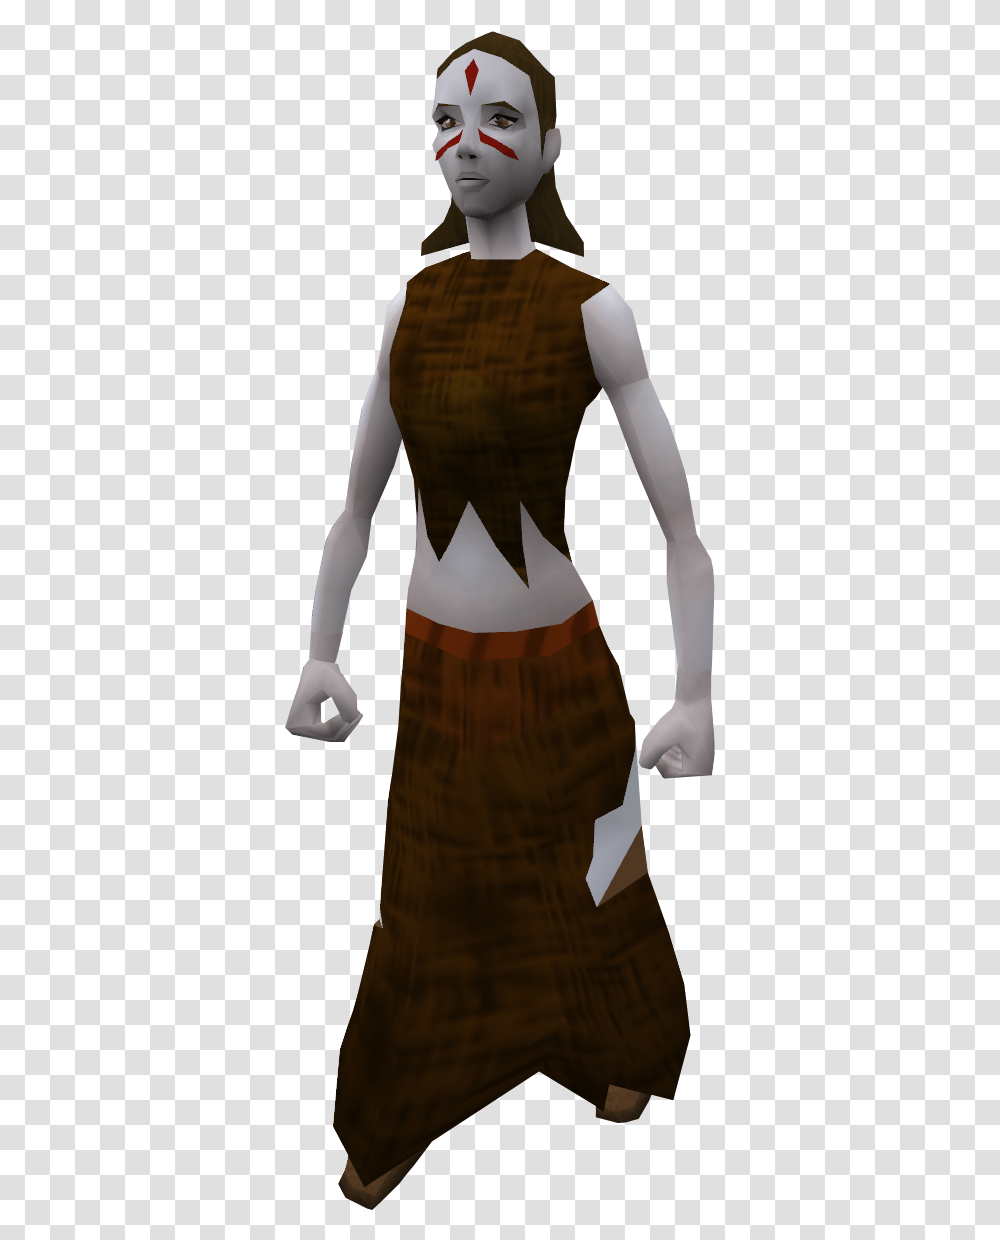 The Oracle In Runescape Lgbtq Video Game Archive Illustration, Clothing, Person, Back, People Transparent Png